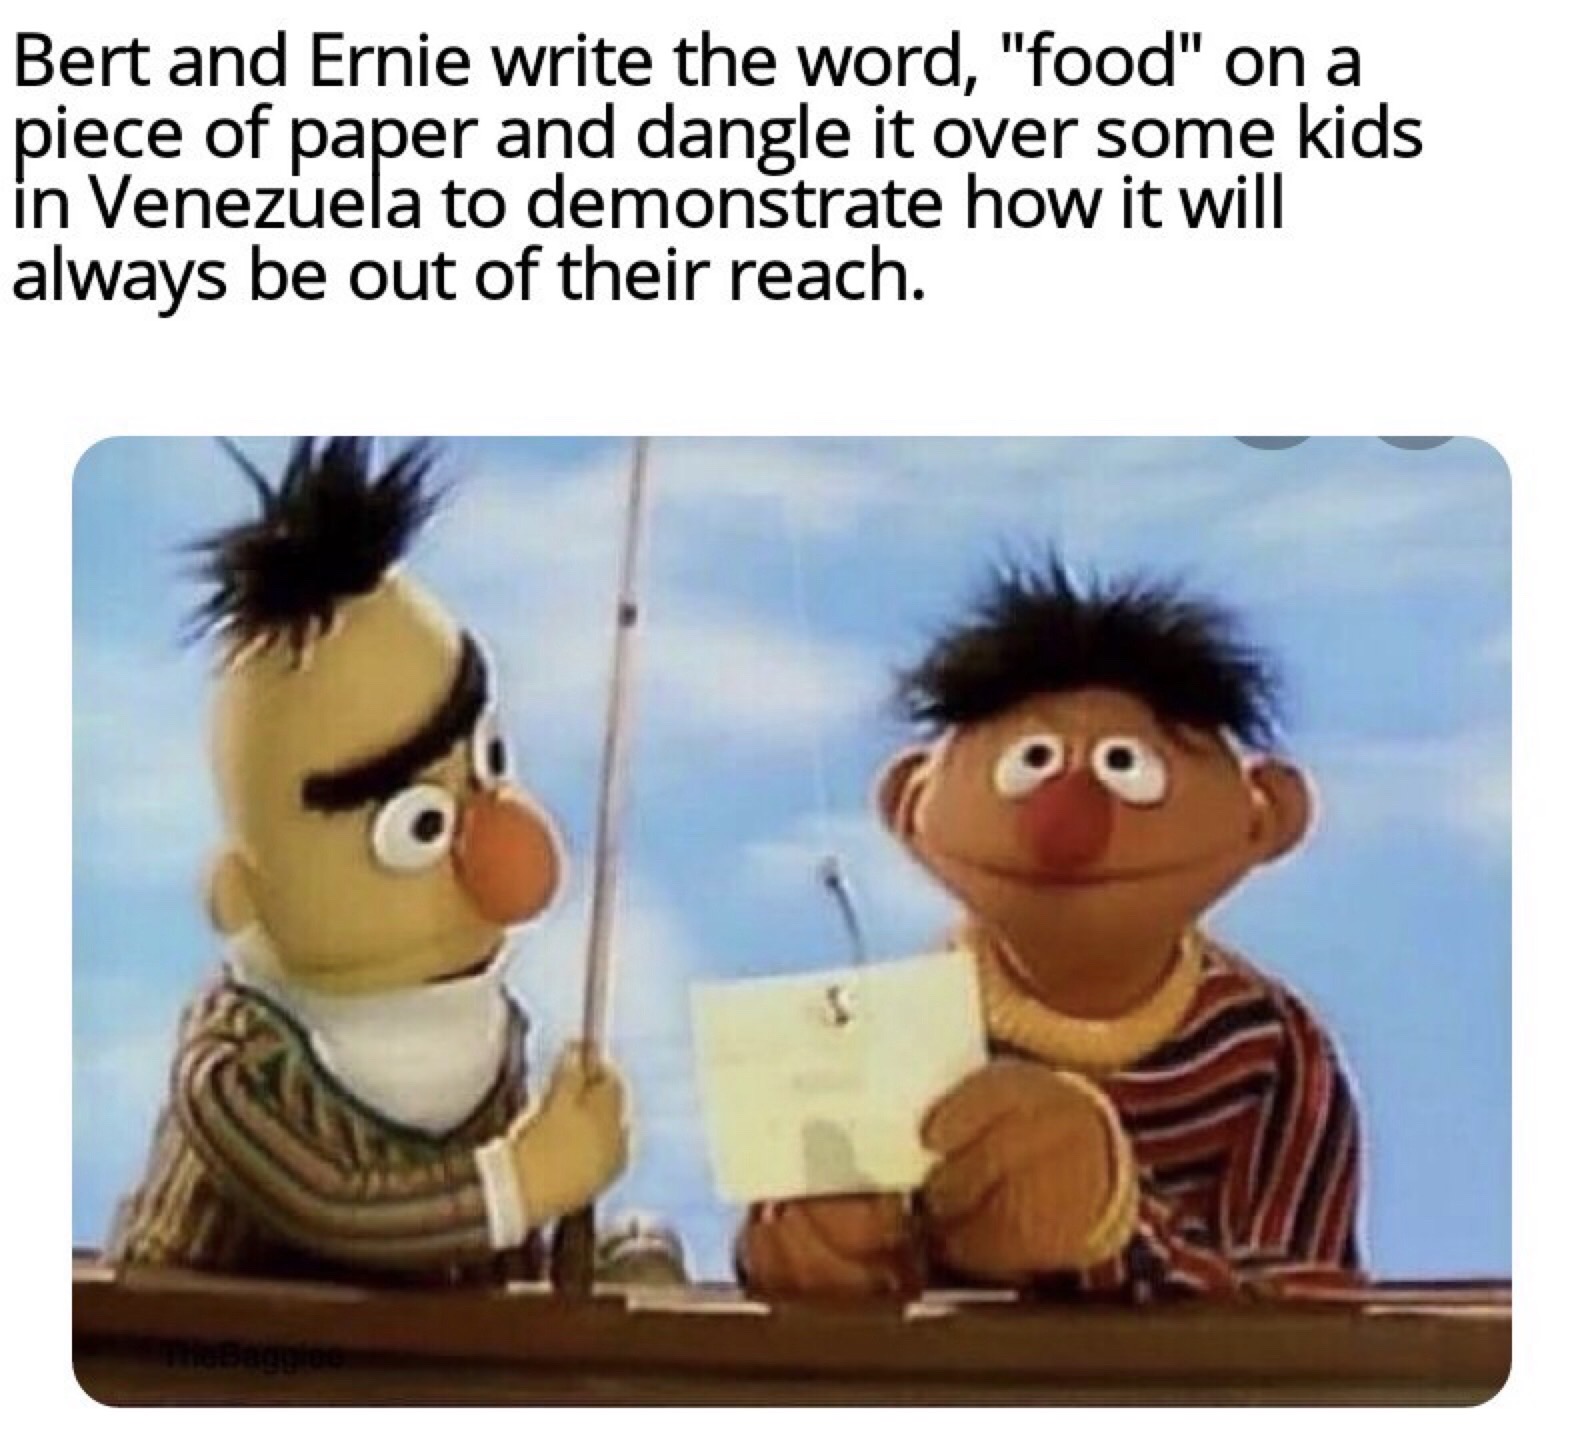 bert and ernie memes dark - Bert and Ernie write the word, "food" on a piece of paper and dangle it over some kids in Venezuela to demonstrate how it will always be out of their reach. The Baggie